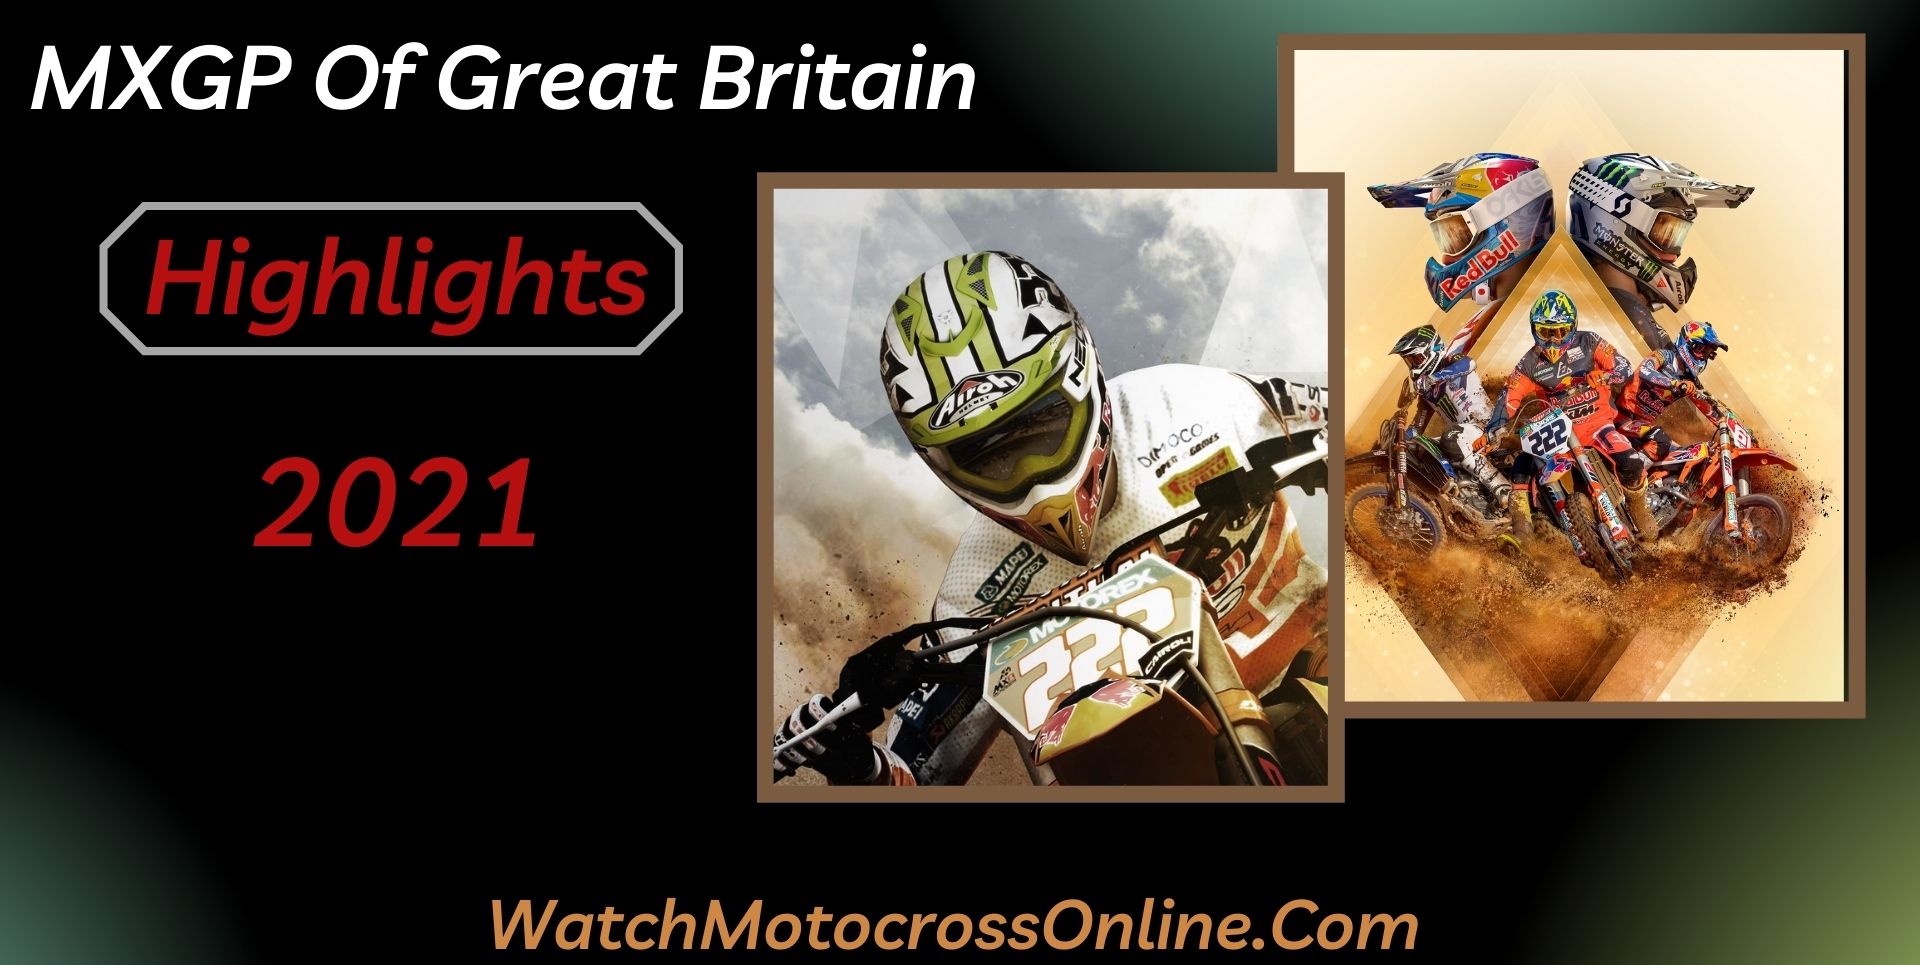 MXGP Of Great Britain Highlights 2021